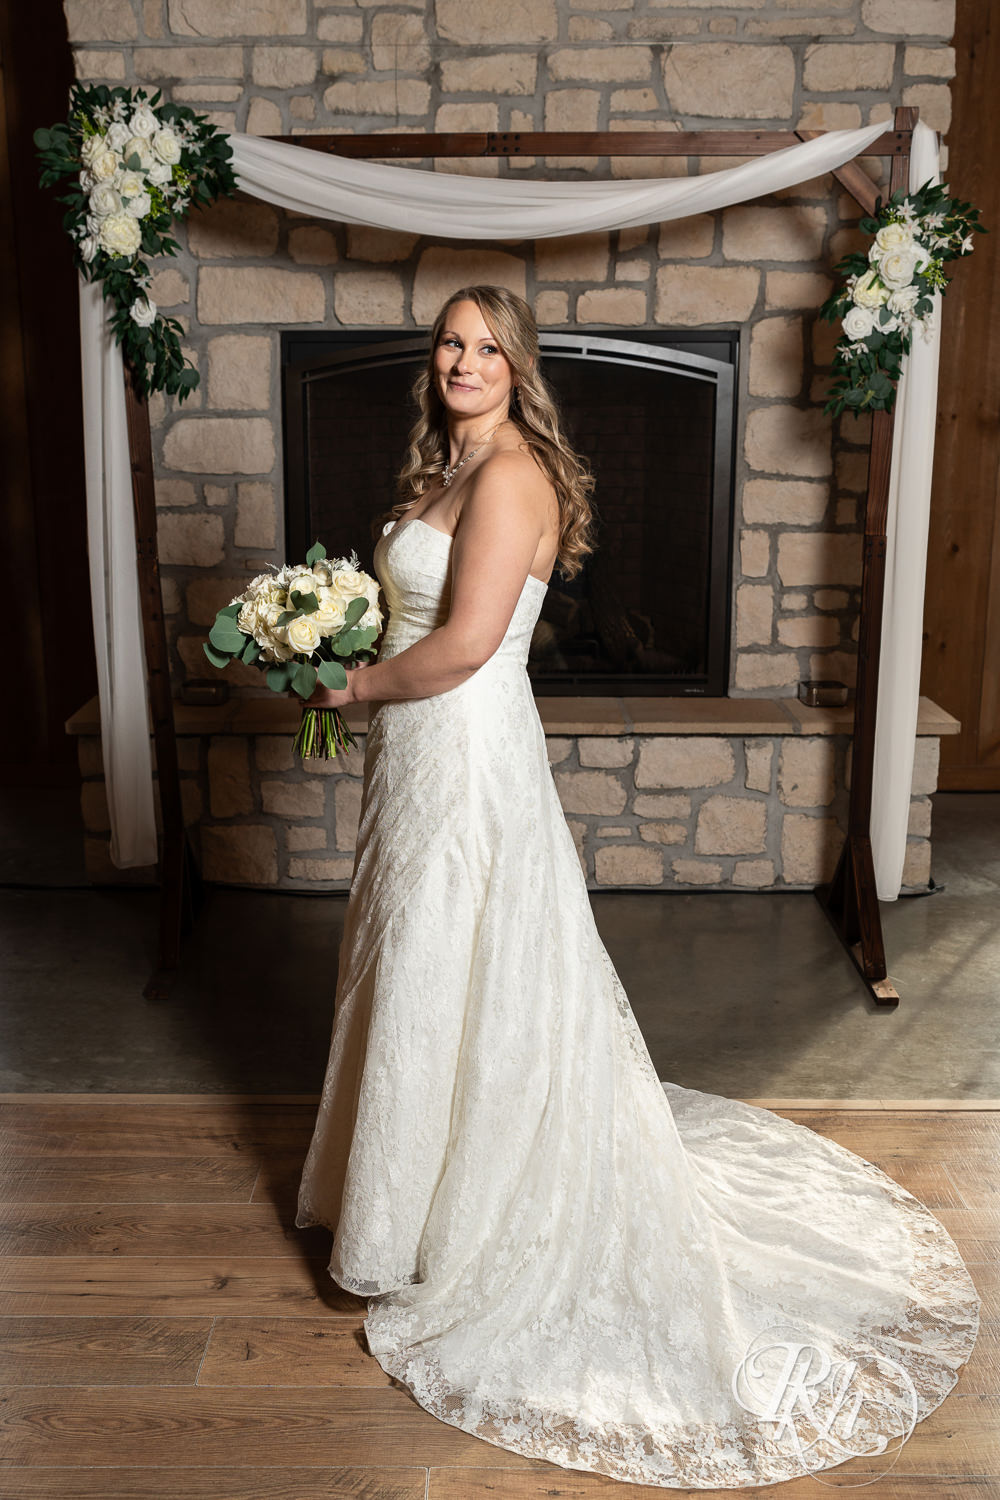 Bride smiles in front of a fireplace at Almquist Farm in Hastings, Minnesota.